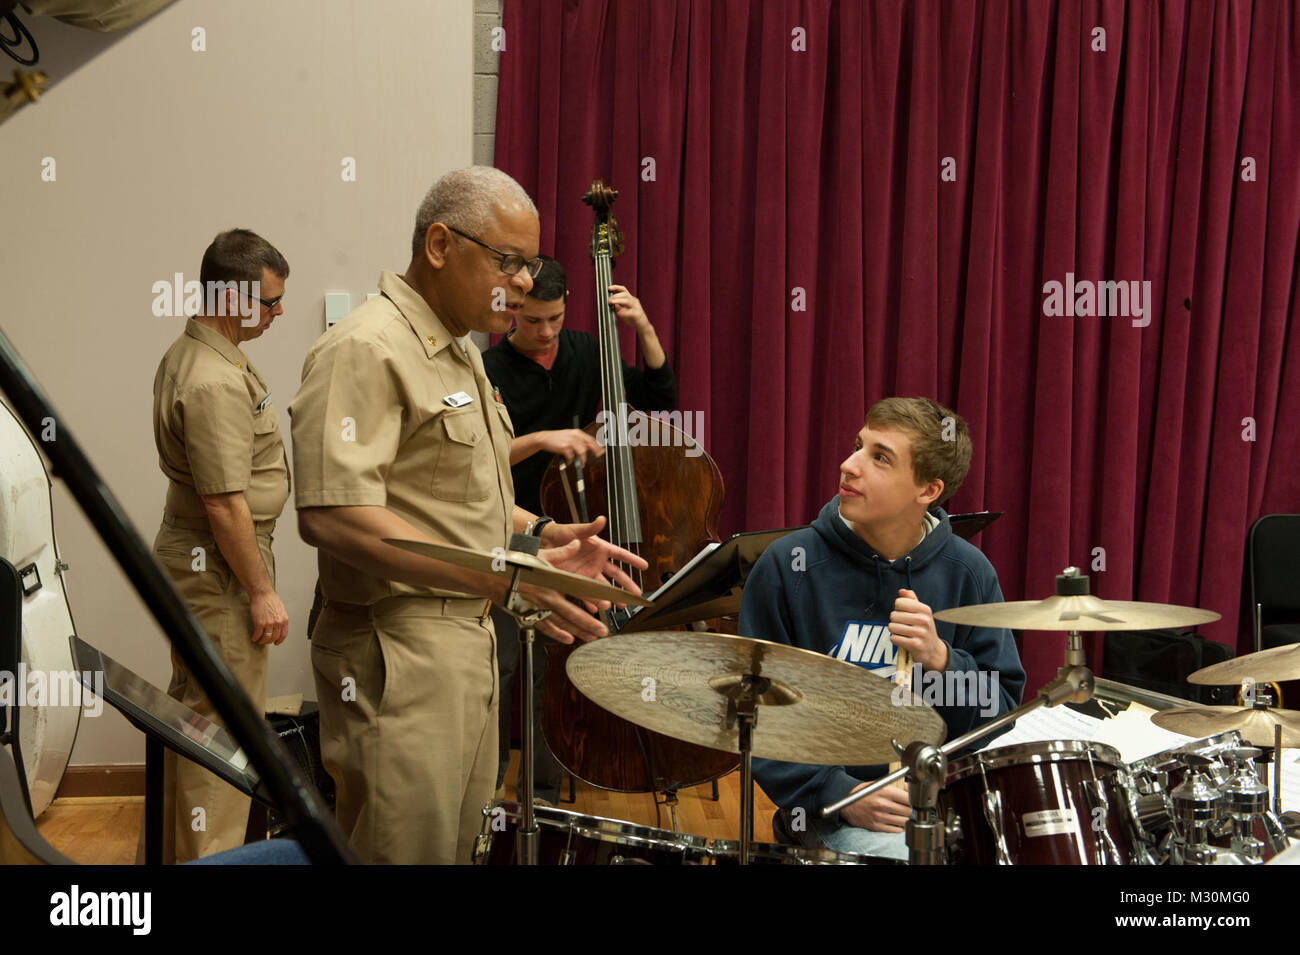 121129-N-HG258-018 WASHINGTON, DC (November 29, 2012)  Chief Musician John Parsons, left, a member of the Navy Band Commodores, discusses drumming techniques to a student from Walt Whitman High School during a visit to the Commodores rehearsal at the Historic Washington Navy Yard in Washington, D.C. The Navy Band presents clinics for local high schools around the Washington, D.C., area as part of their music in the schools program designed to supplement music education curricula and build bridges between the Navy and younger generations. Walt Whitman High School visits Commodores by United Sta Stock Photo